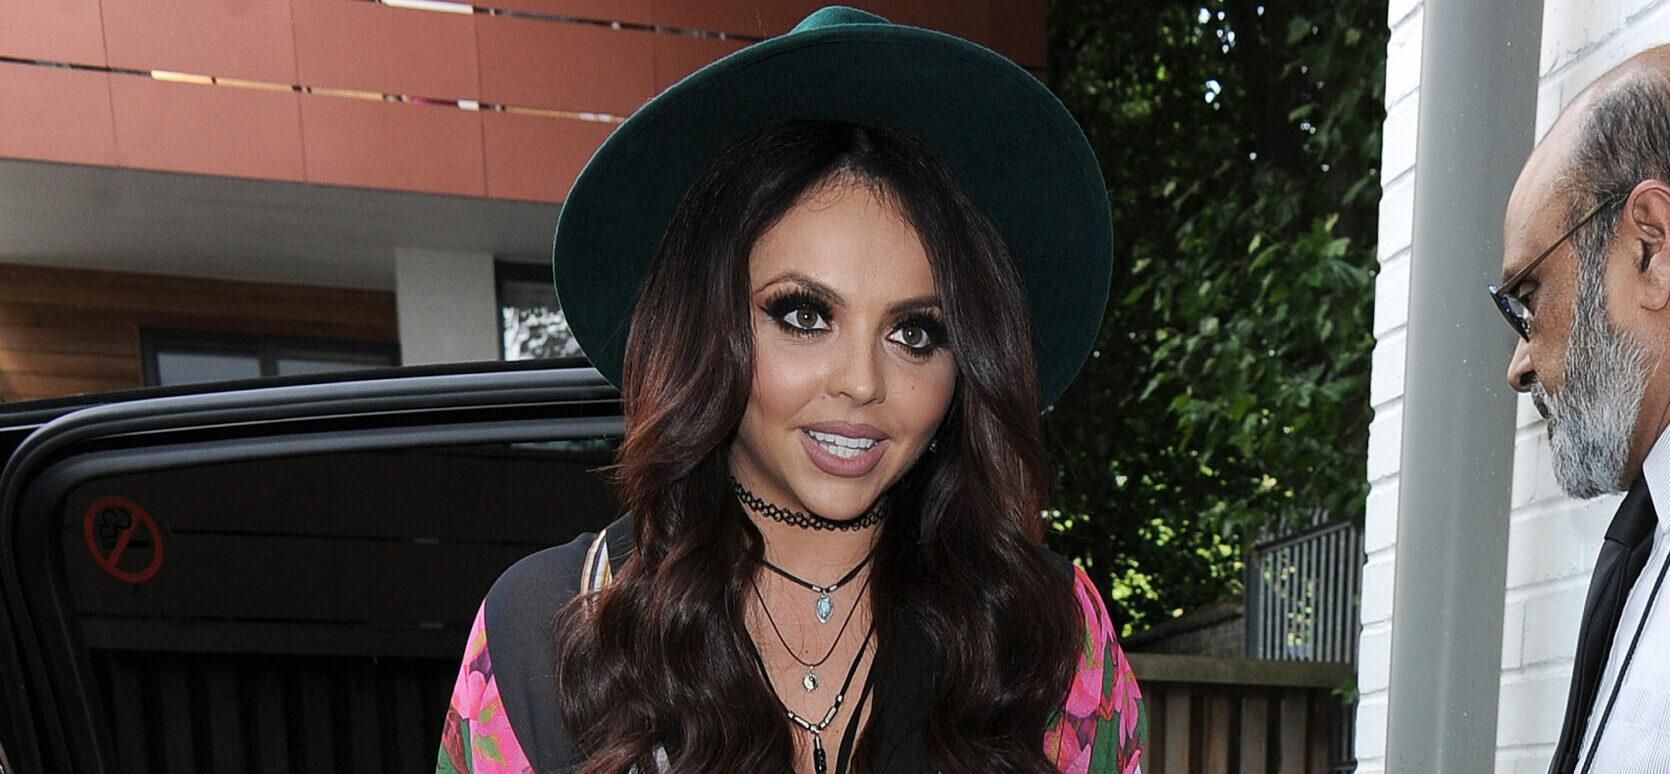 Jesy Nelson Shares Cryptic Post About ‘Challenges’ & Being ‘Successful’